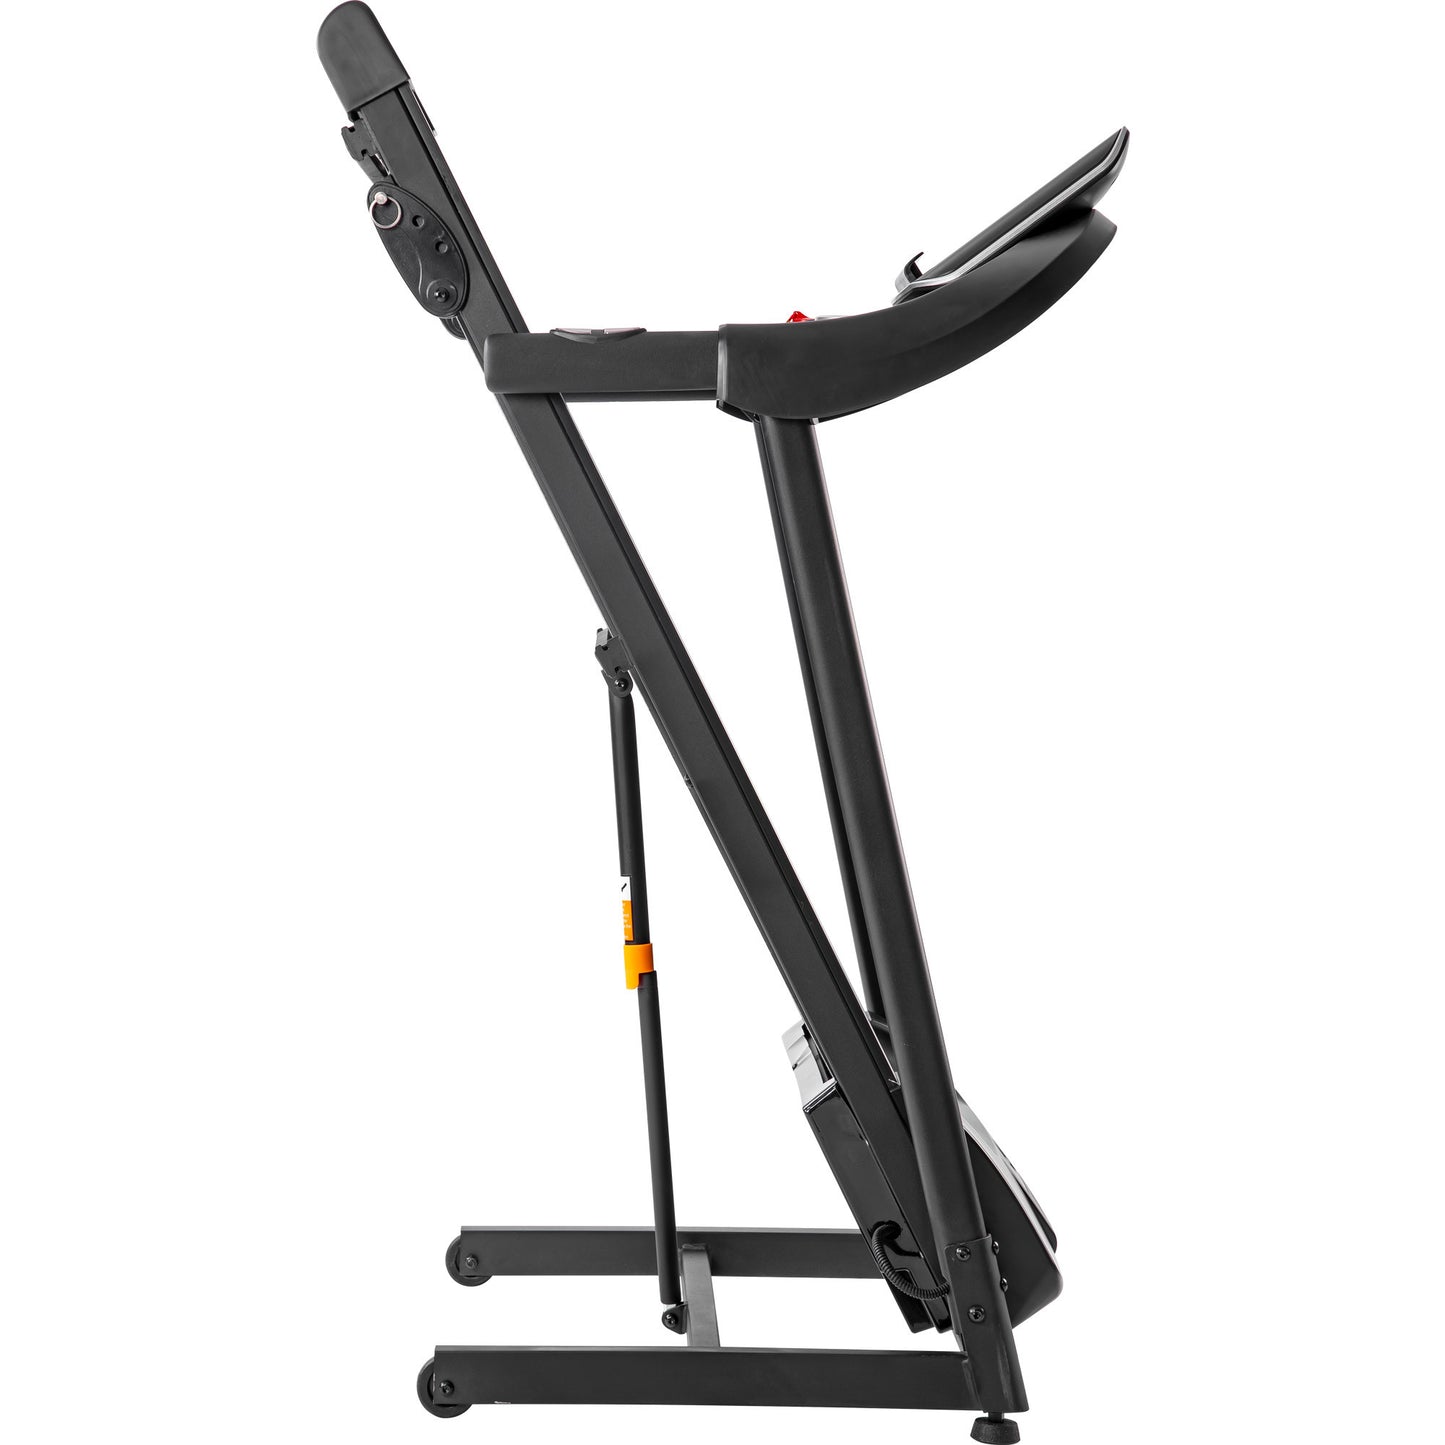 Treadmill with Electric Motorized, Audio Speakers and Incline for Home Gym